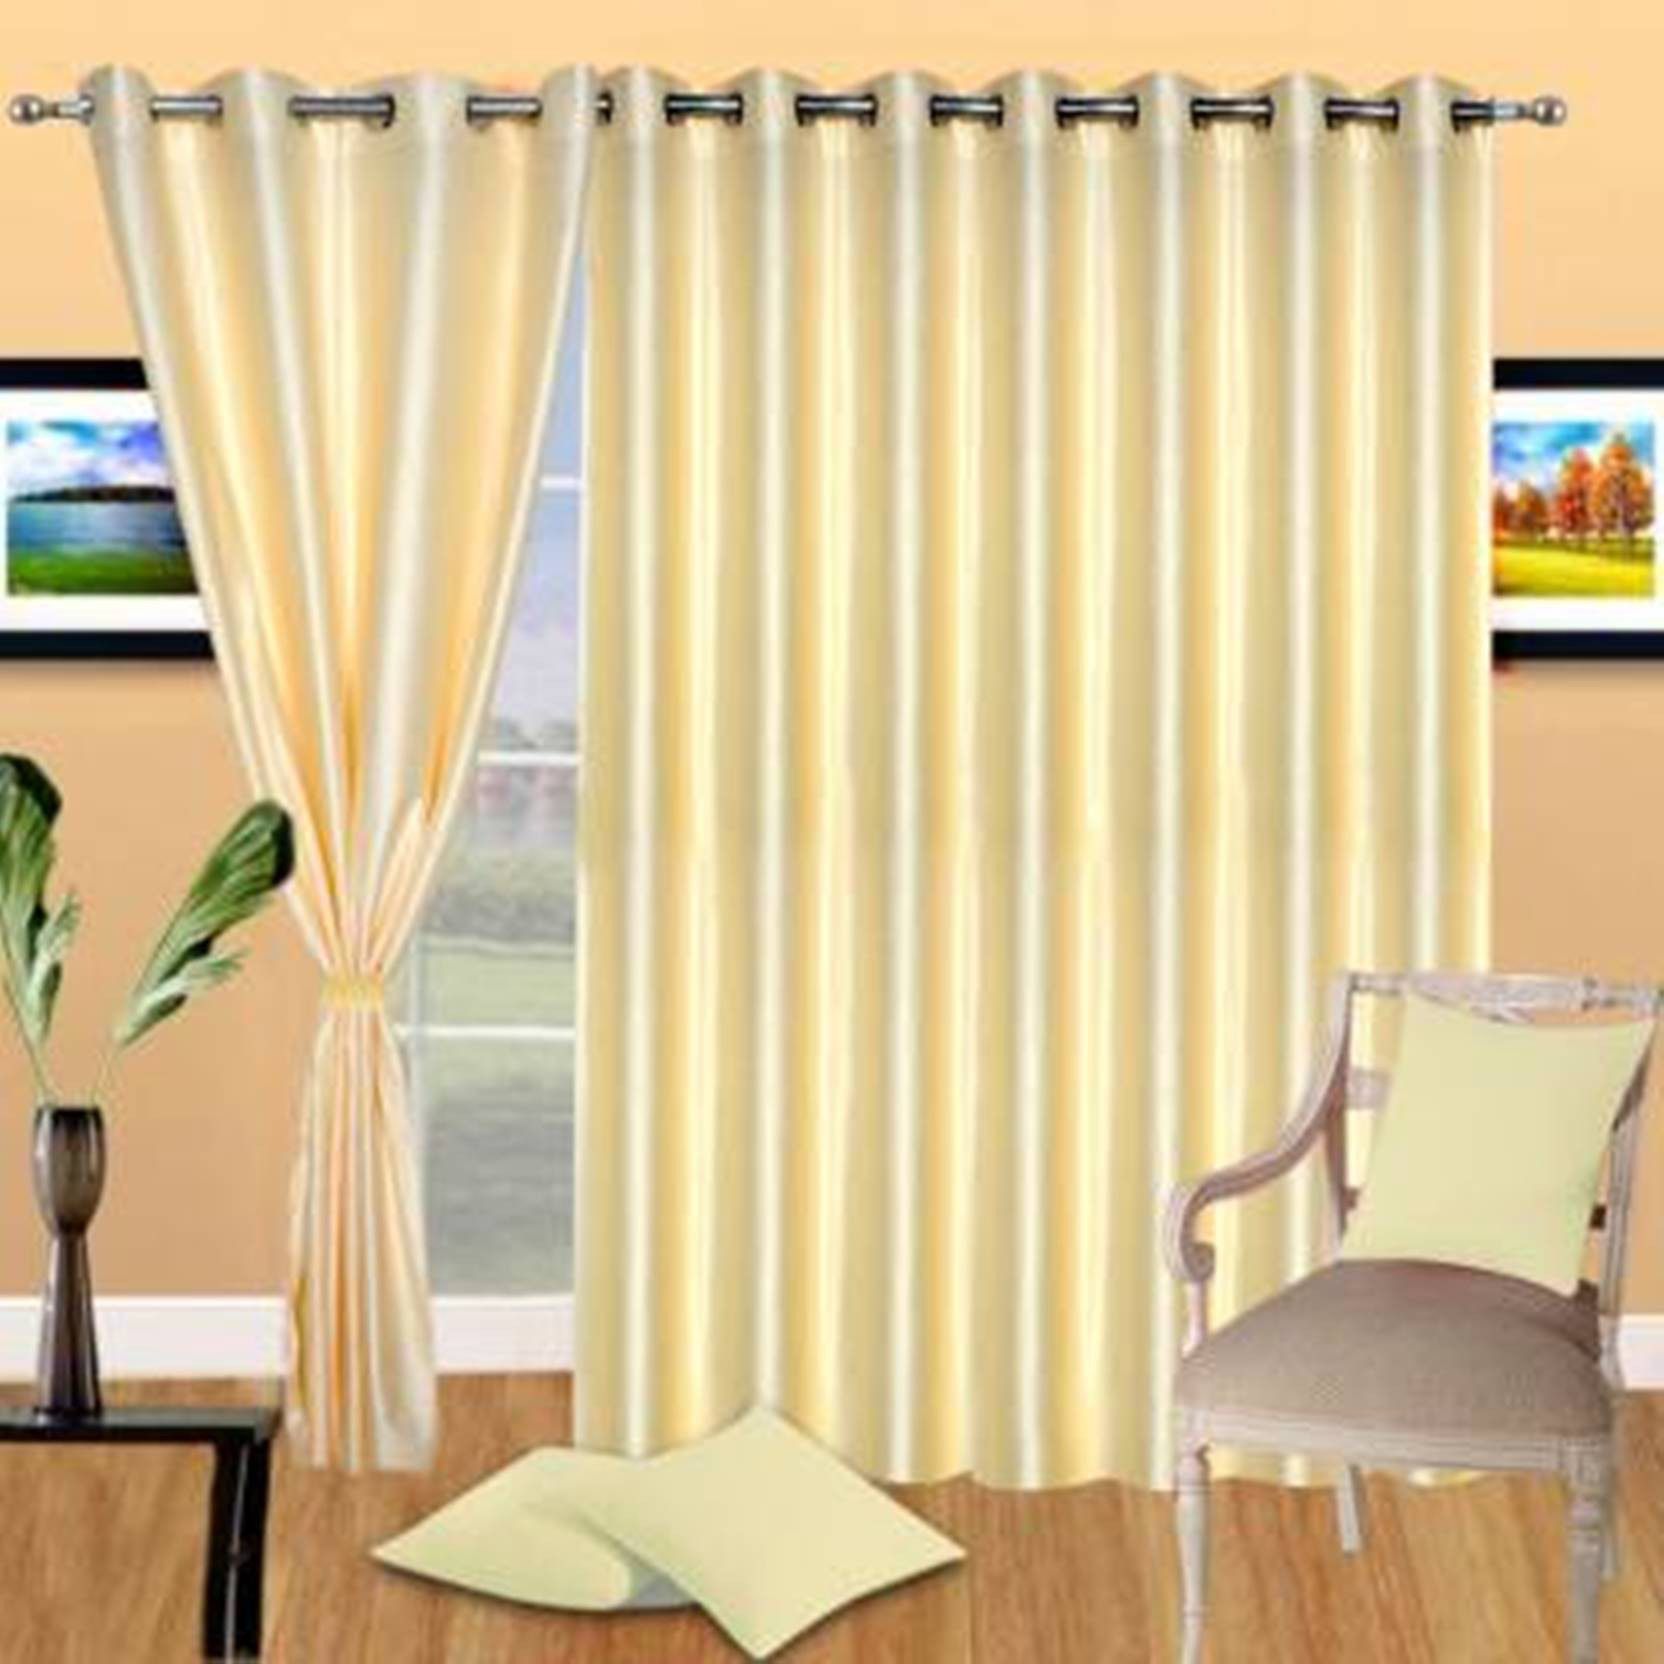     			N2C Home Solid Semi-Transparent Eyelet Curtain 5 ft ( Pack of 3 ) - Cream